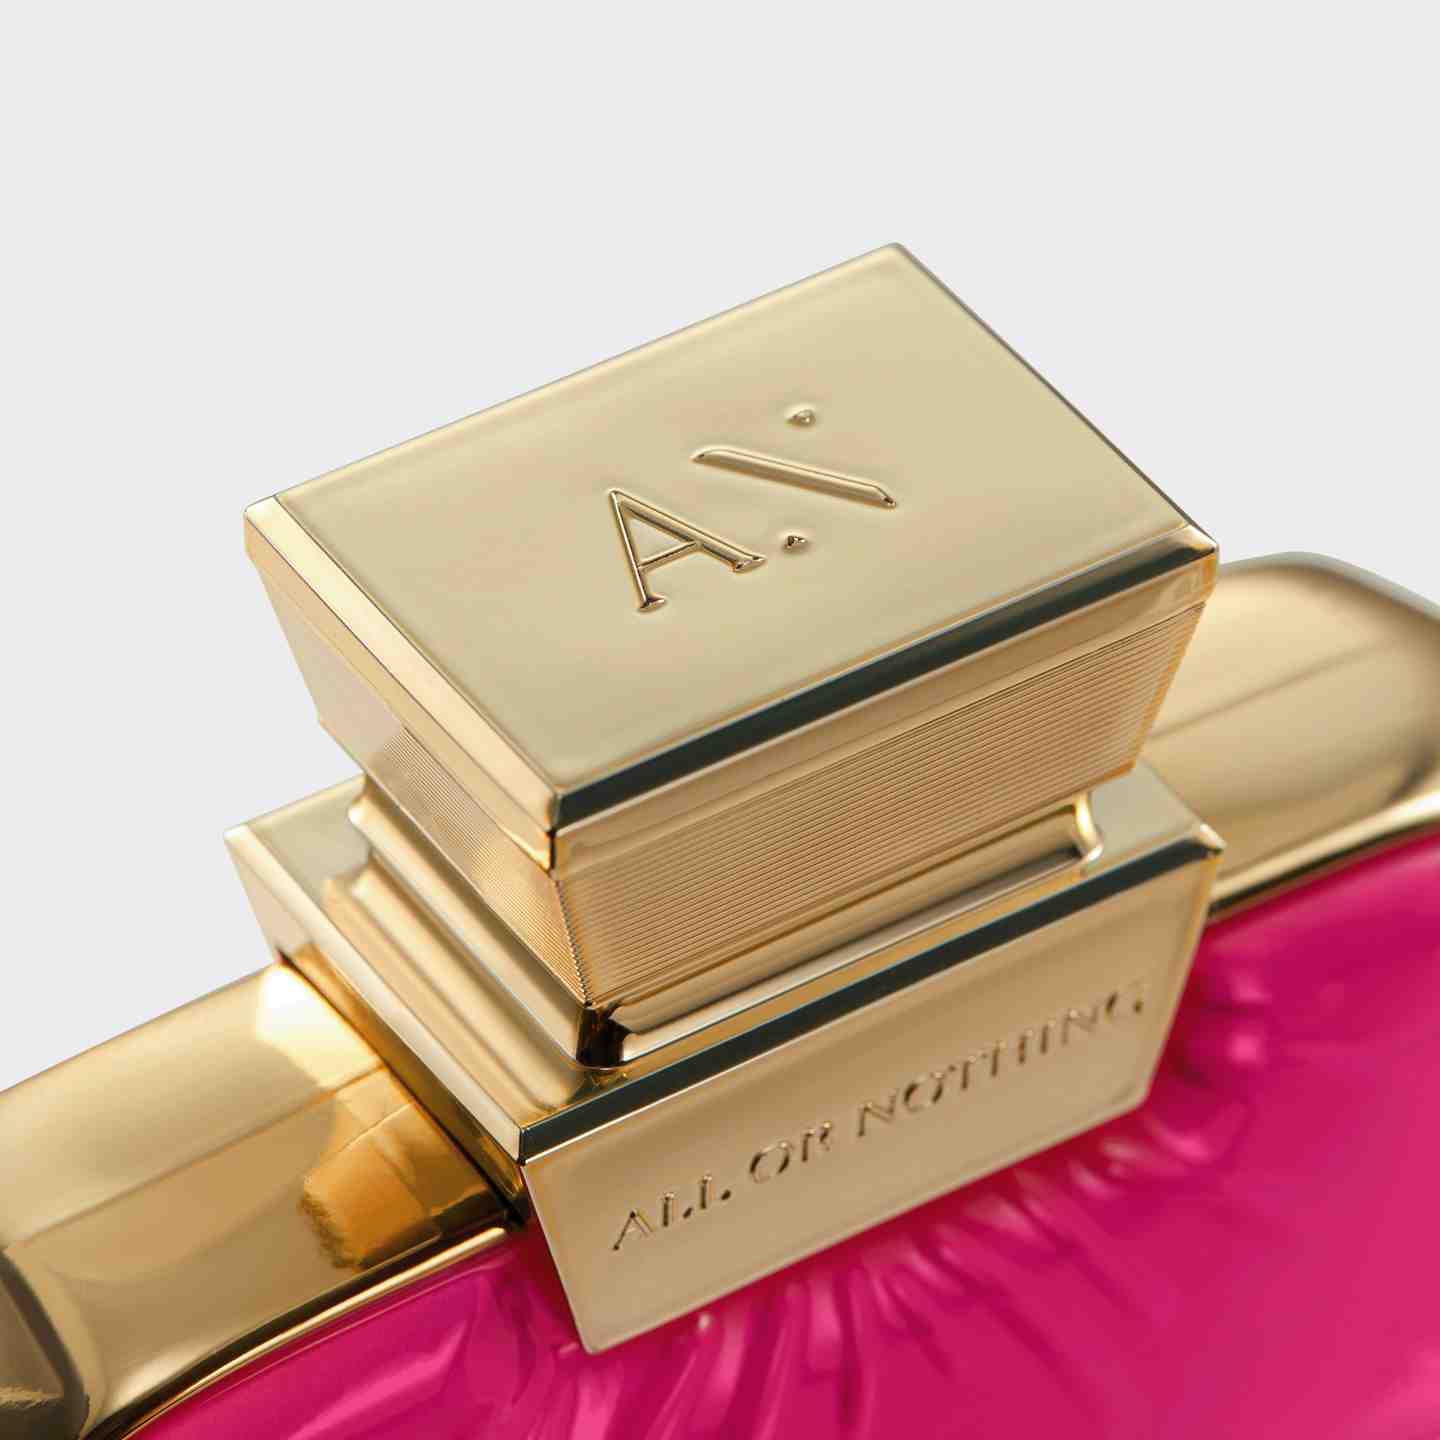 All or Nothing Amplified Oriflame perfume - a new fragrance for